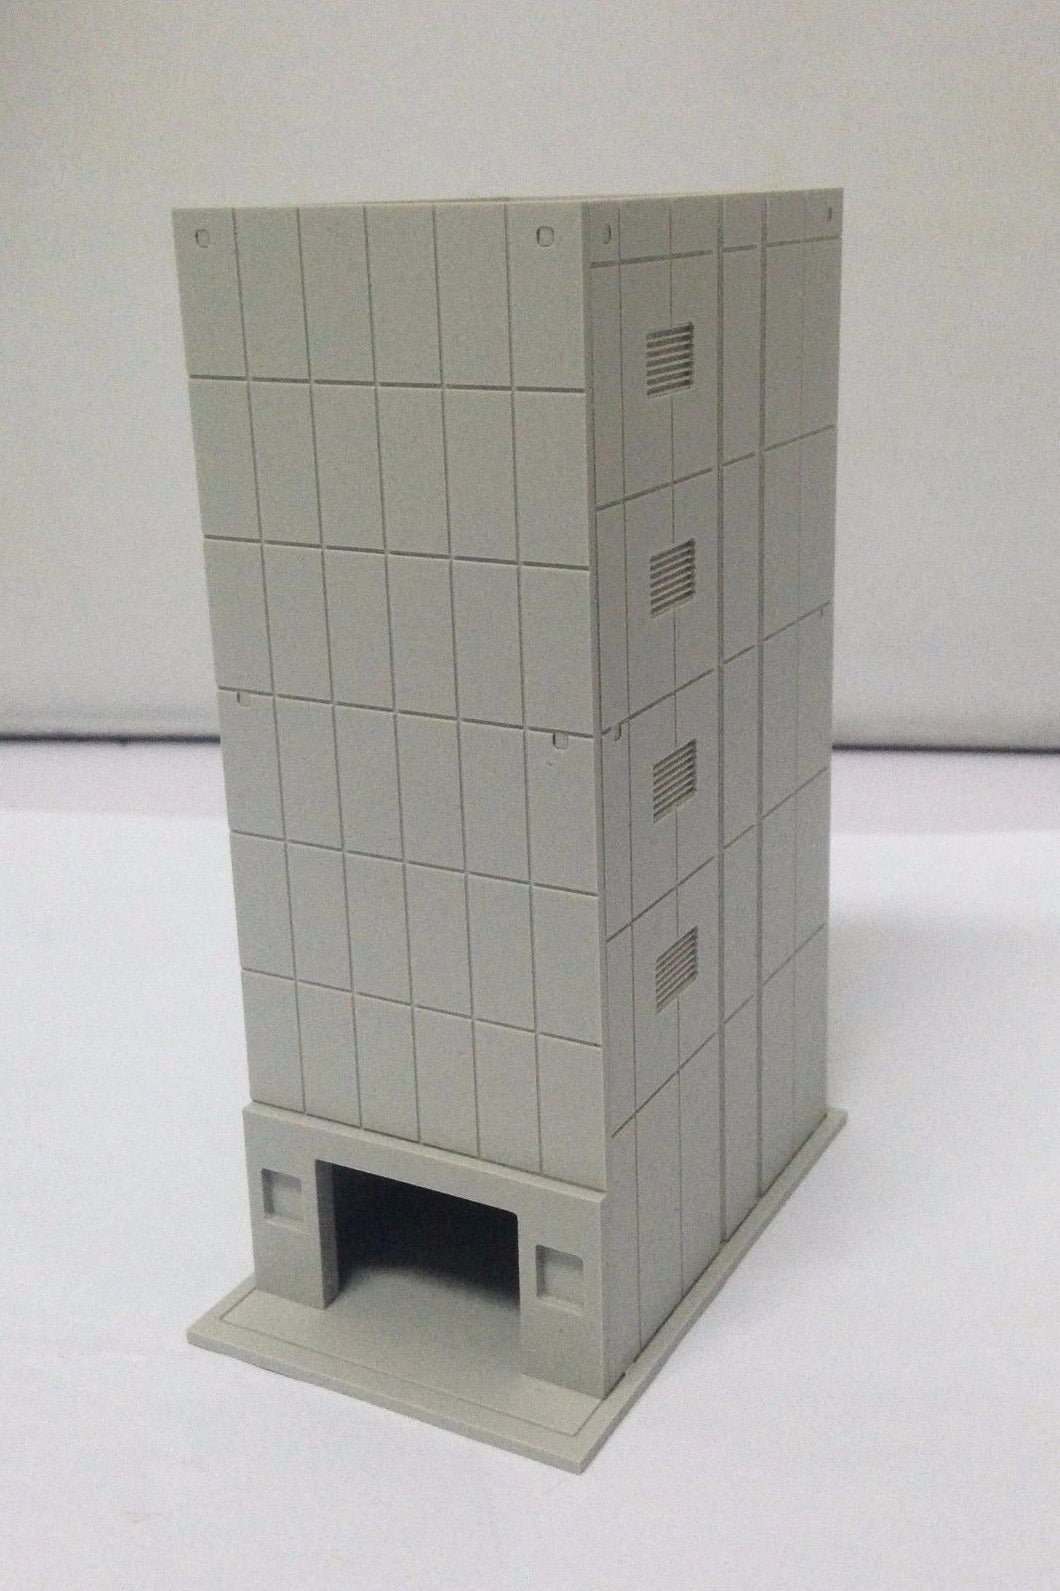 Modern Downtown Stylish Tall Building N Scale Outland Models Railway